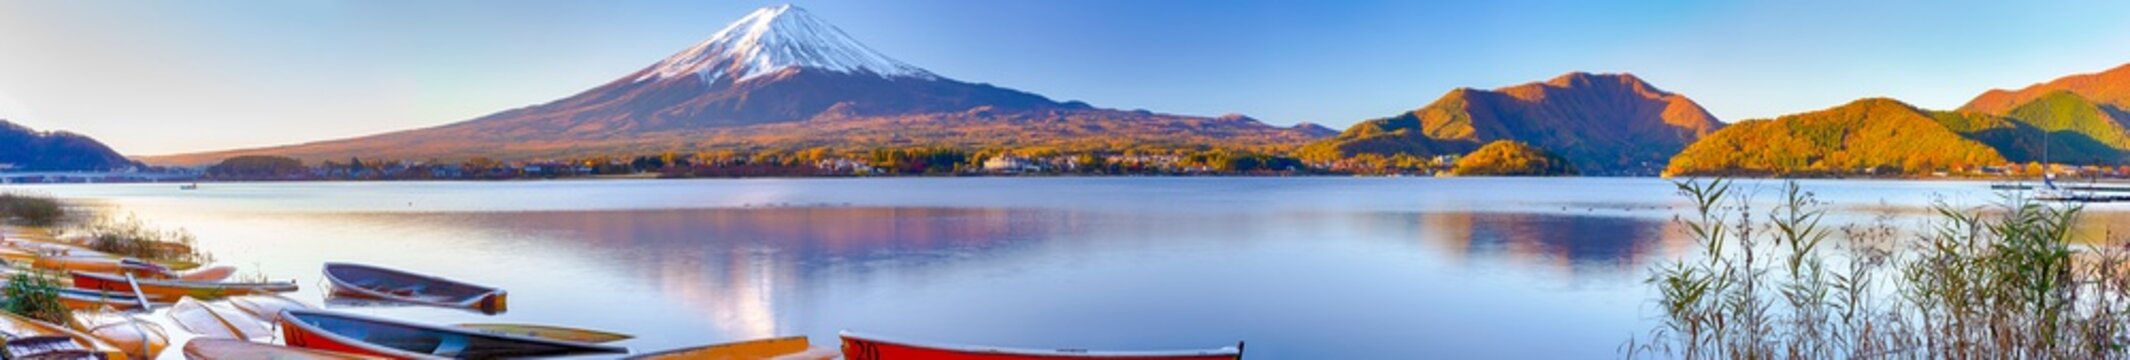 Japan Travel Destinations. Panoramic Image of Renowned Marvelous Fuji Mountain At Kawaguchiko Lake in Japan With Line of Colorful Boats in Foregound.